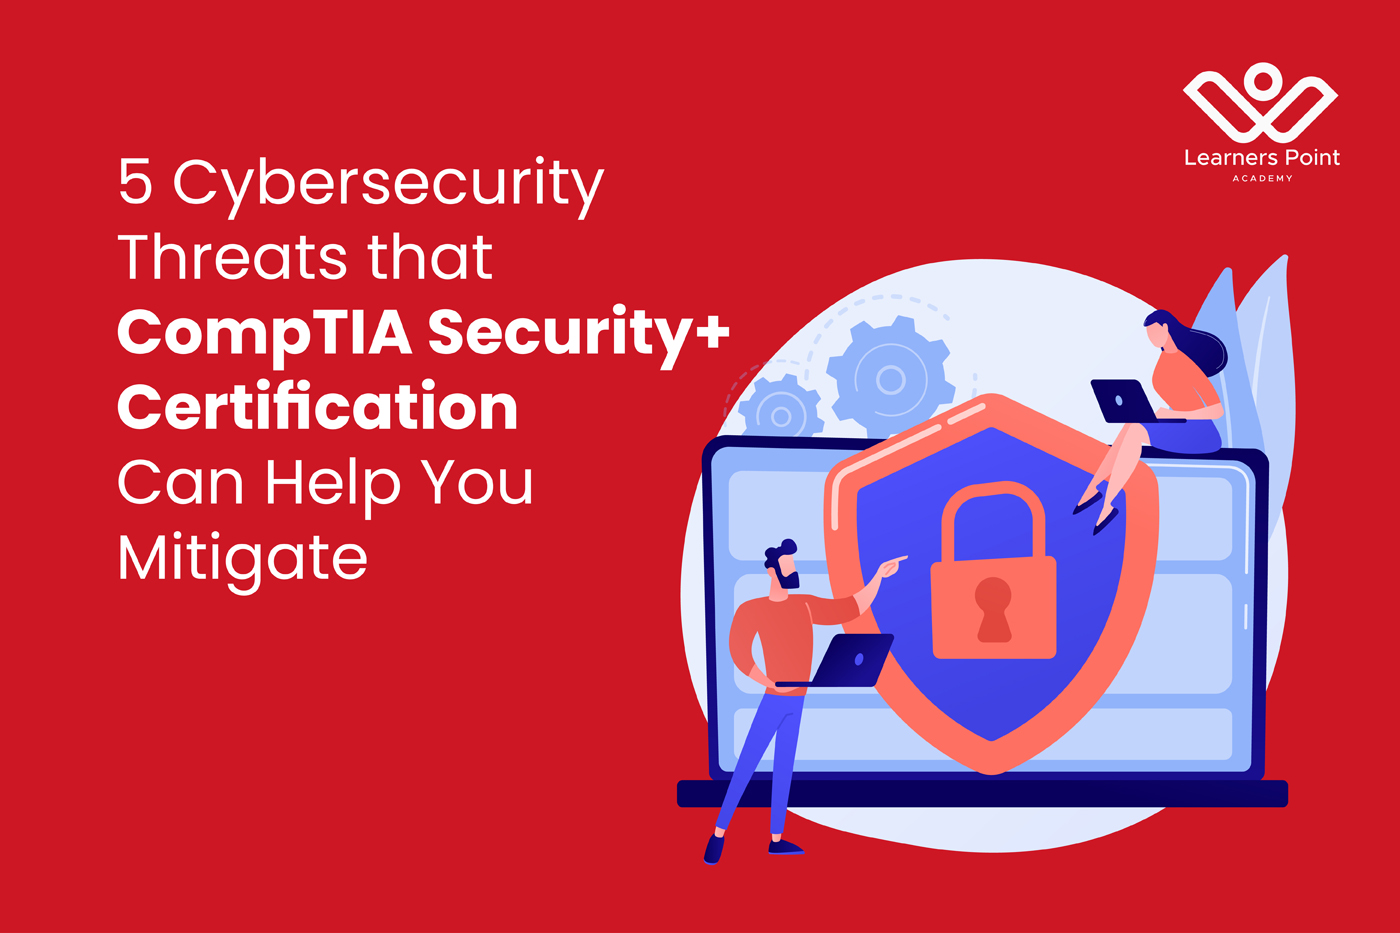 5 Cybersecurity Threats that CompTIA Security+ Certification Can Help You Mitigate